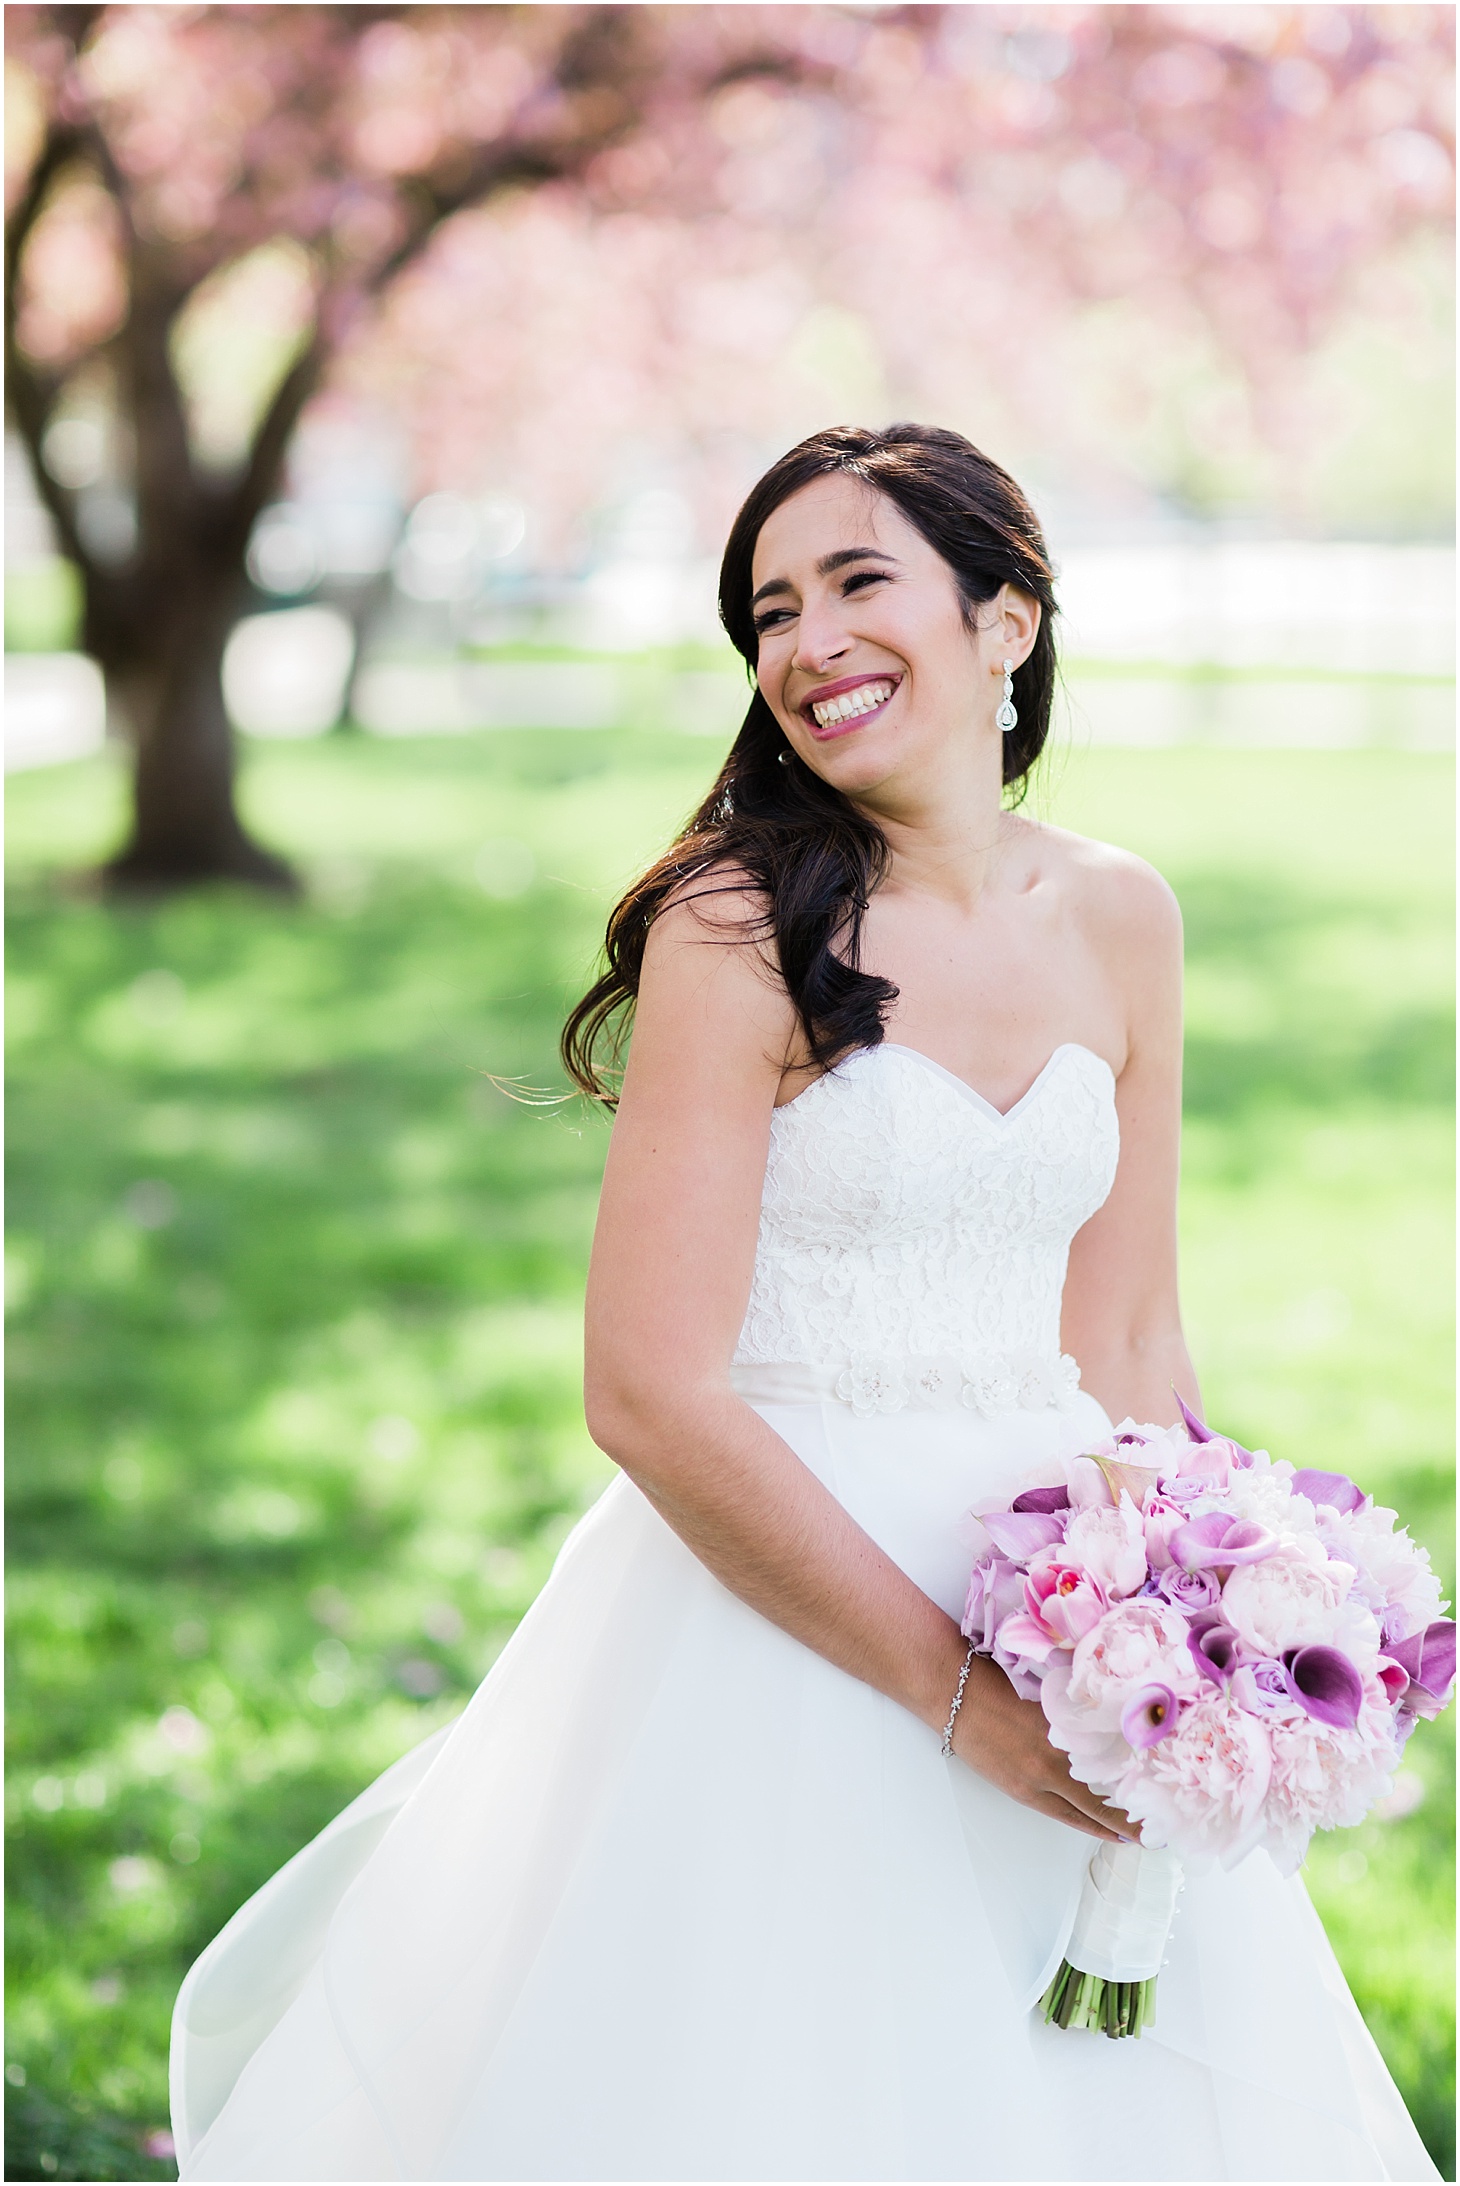 Bridal Portrait under Cherry Trees, B Floral Bouquet, Museum-Inspired Spring Wedding at National Museum of Women in the Arts, Sarah Bradshaw Photography, DC Wedding Photographer